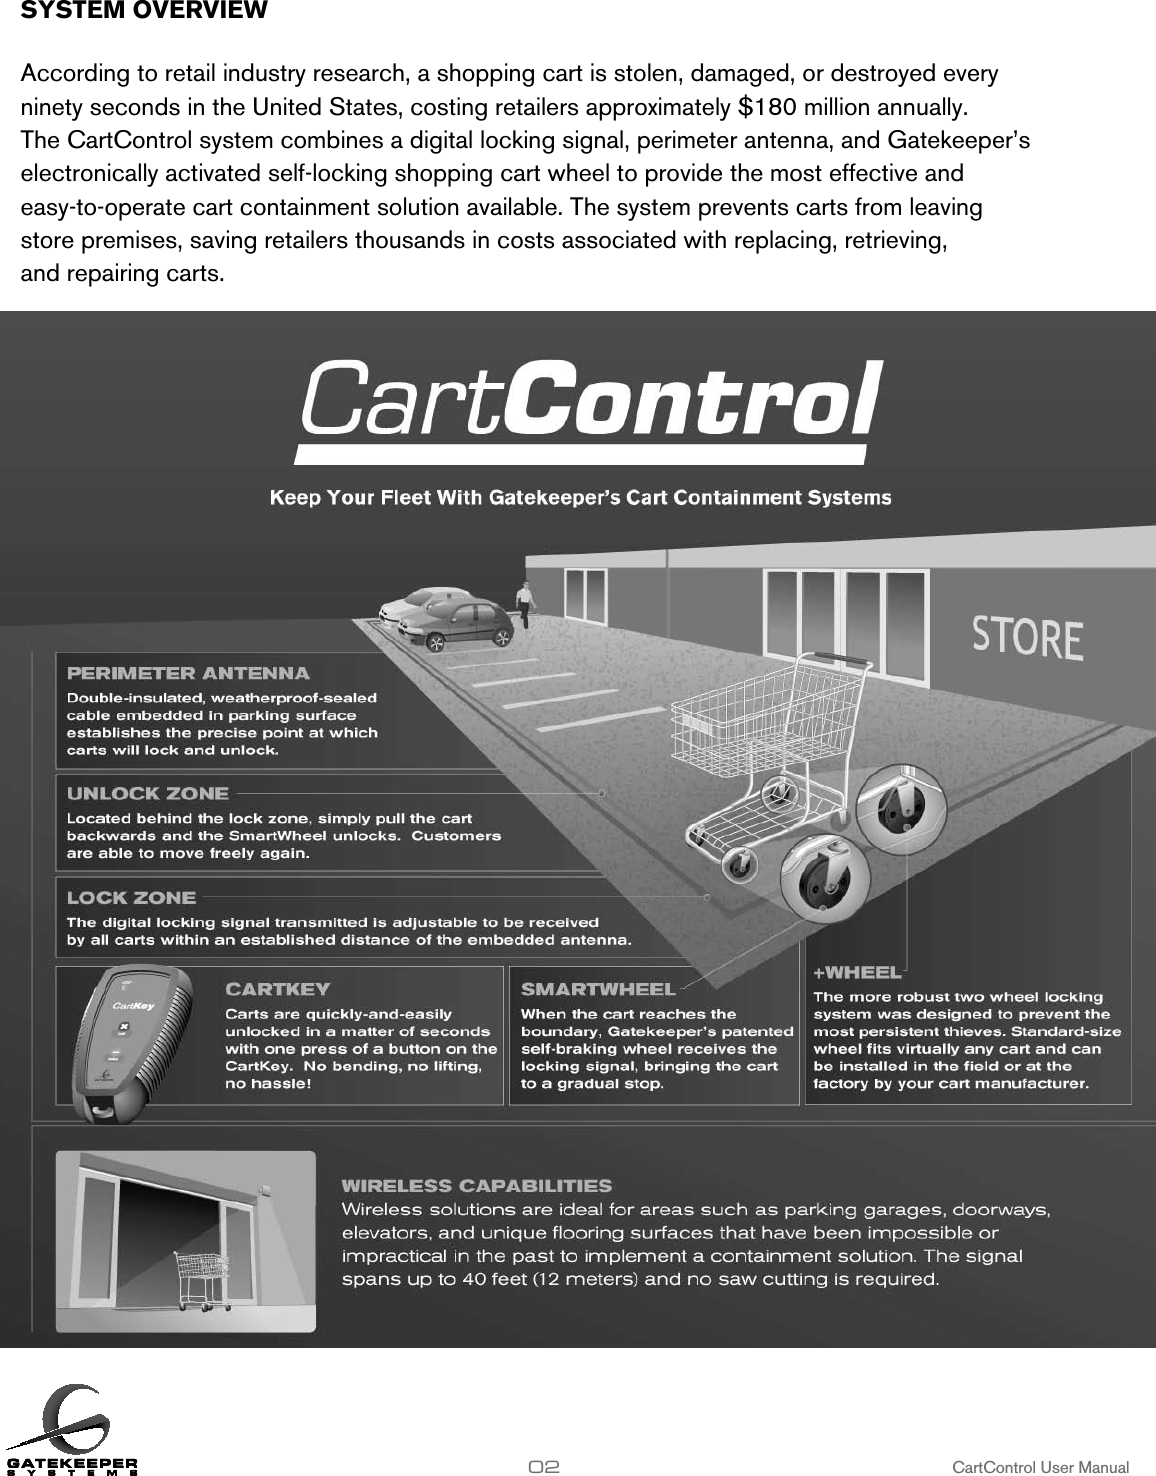 SYSTEM OVERVIEW                 According to retail industry research, a shopping cart is stolen, damaged, or destroyed every  ninety seconds in the United States, costing retailers approximately $180 million annually.  The CartControl system combines a digital locking signal, perimeter antenna, and Gatekeeper’s  electronically activated self-locking shopping cart wheel to provide the most effective and  easy-to-operate cart containment solution available. The system prevents carts from leaving  store premises, saving retailers thousands in costs associated with replacing, retrieving,  and repairing carts.  02                     CartControl User Manual